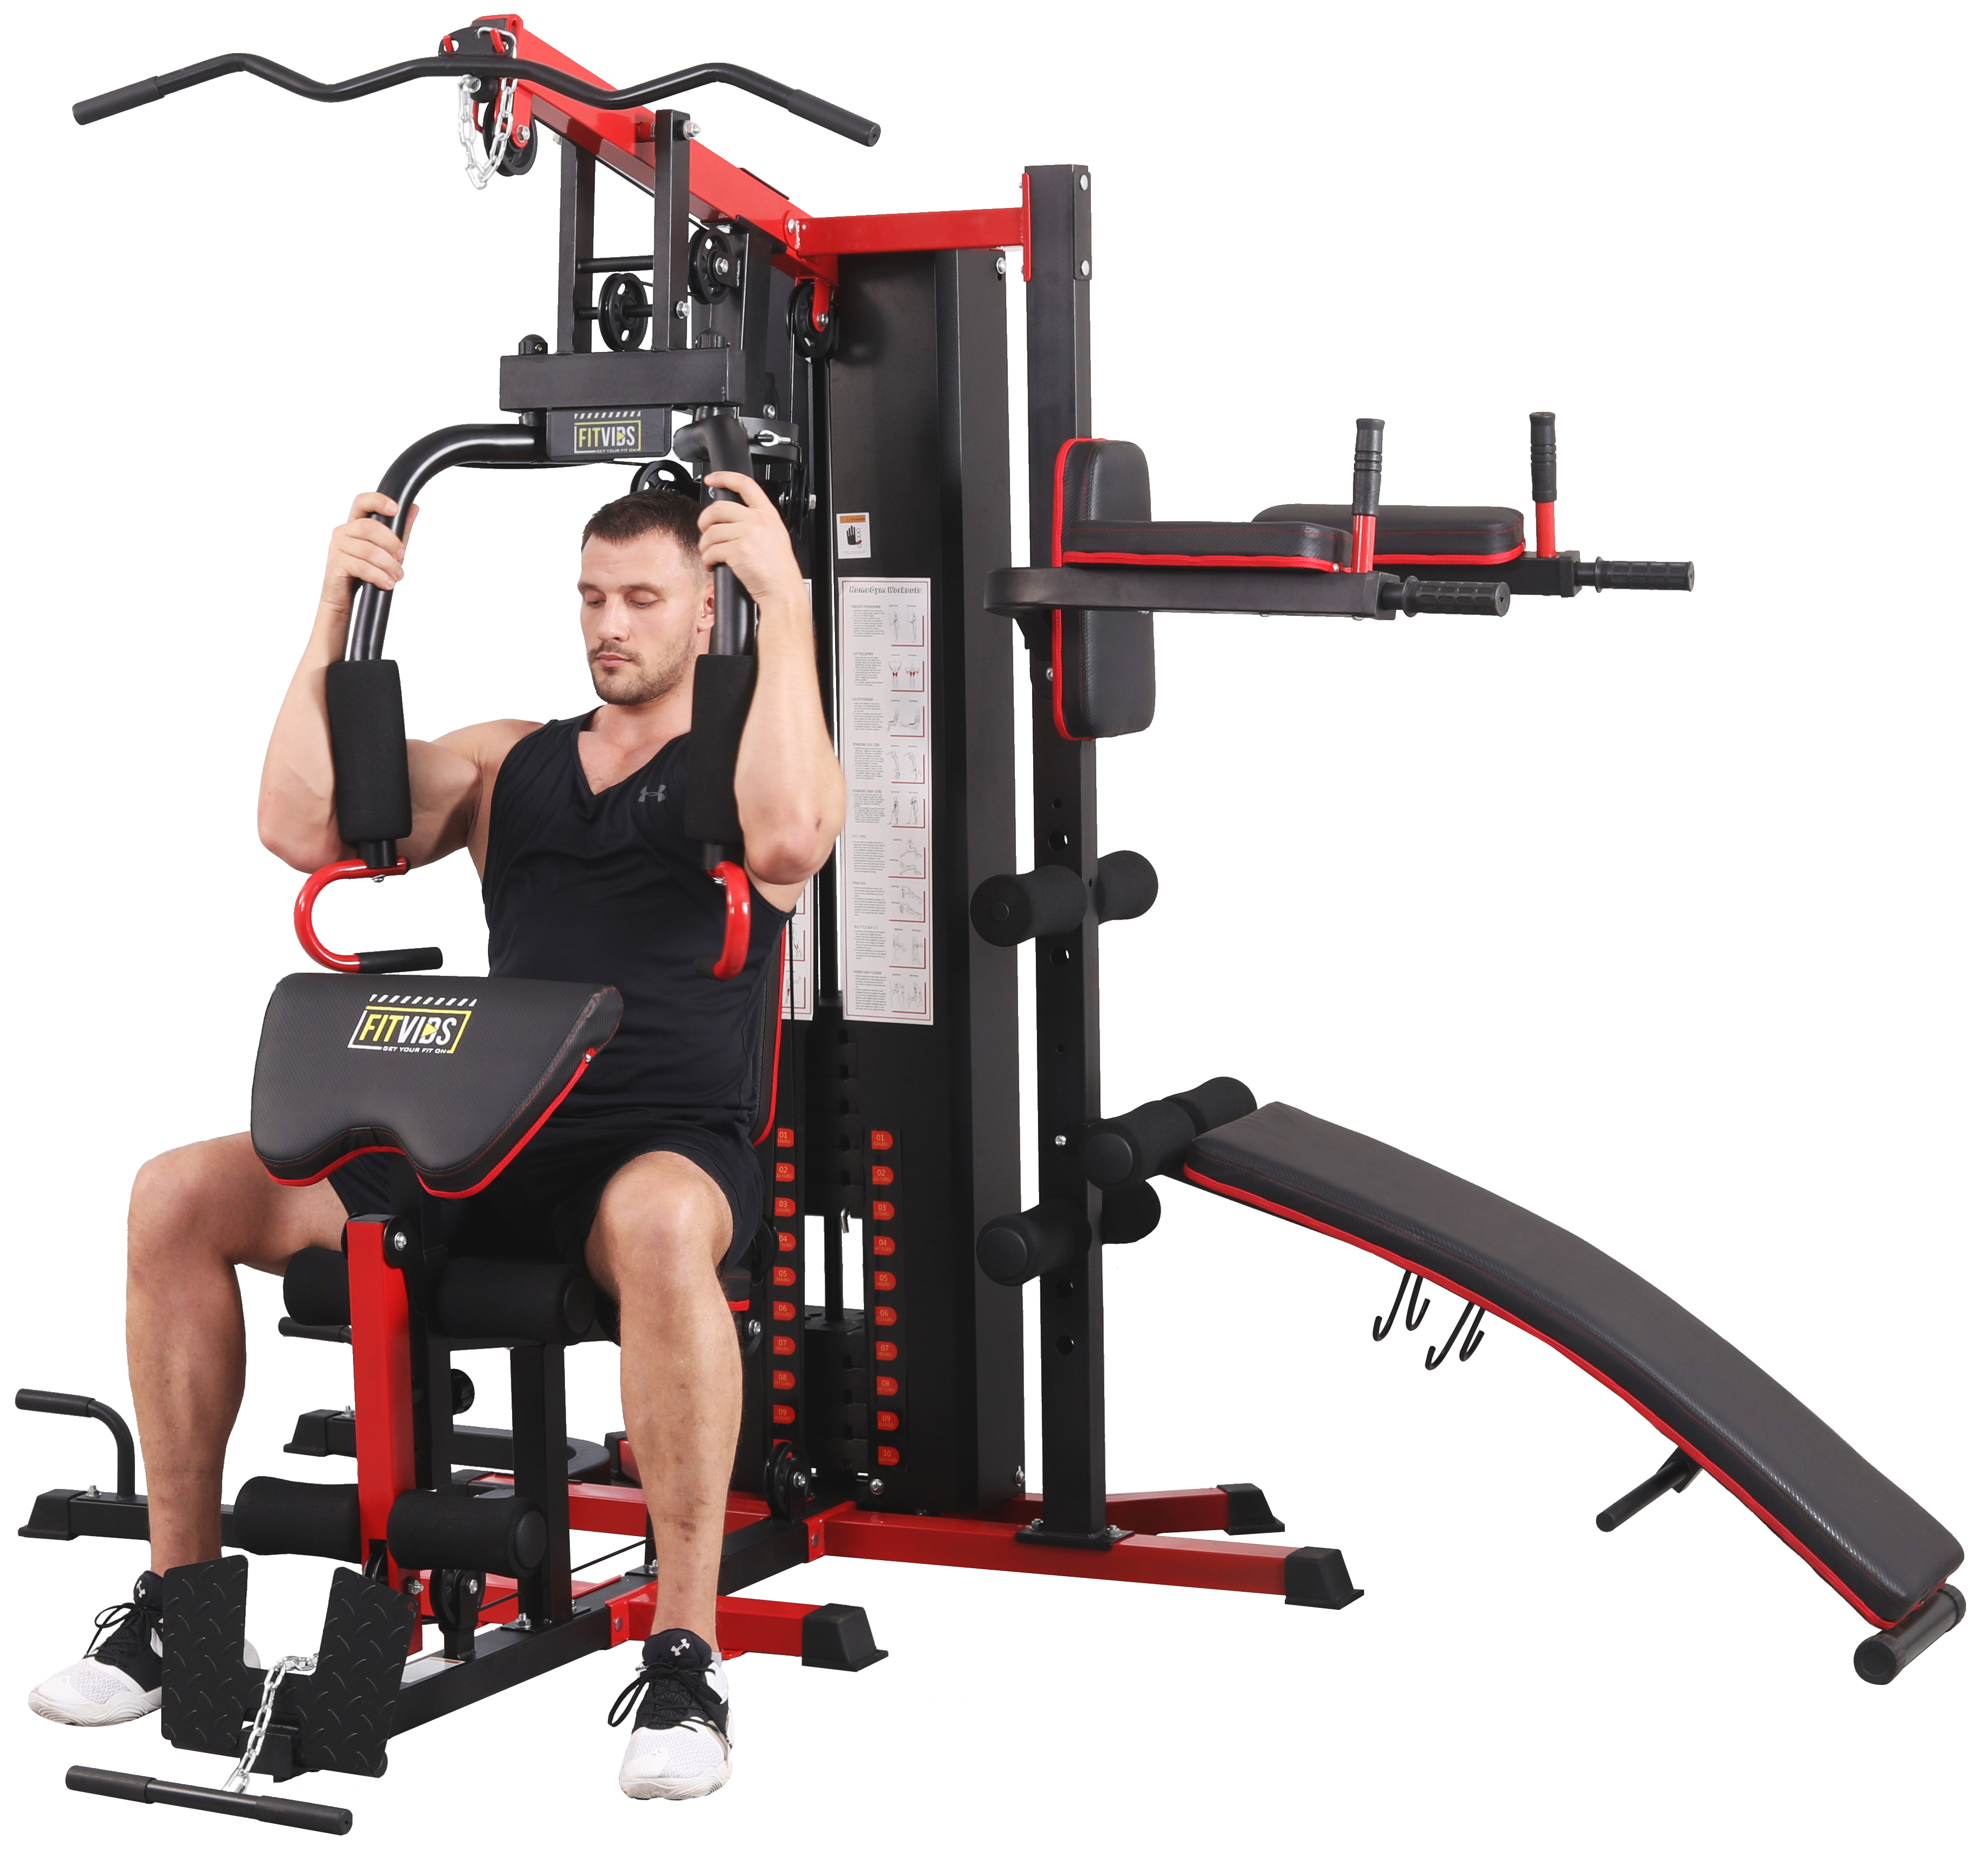 Fitvids LX900 Home Gym System Workout Station with 330 Lbs of Resistance, 122.5 Lbs Weight Stack, Three Station, Comes with Installation Instruction Video, Ships in 7 Boxes - image 3 of 13